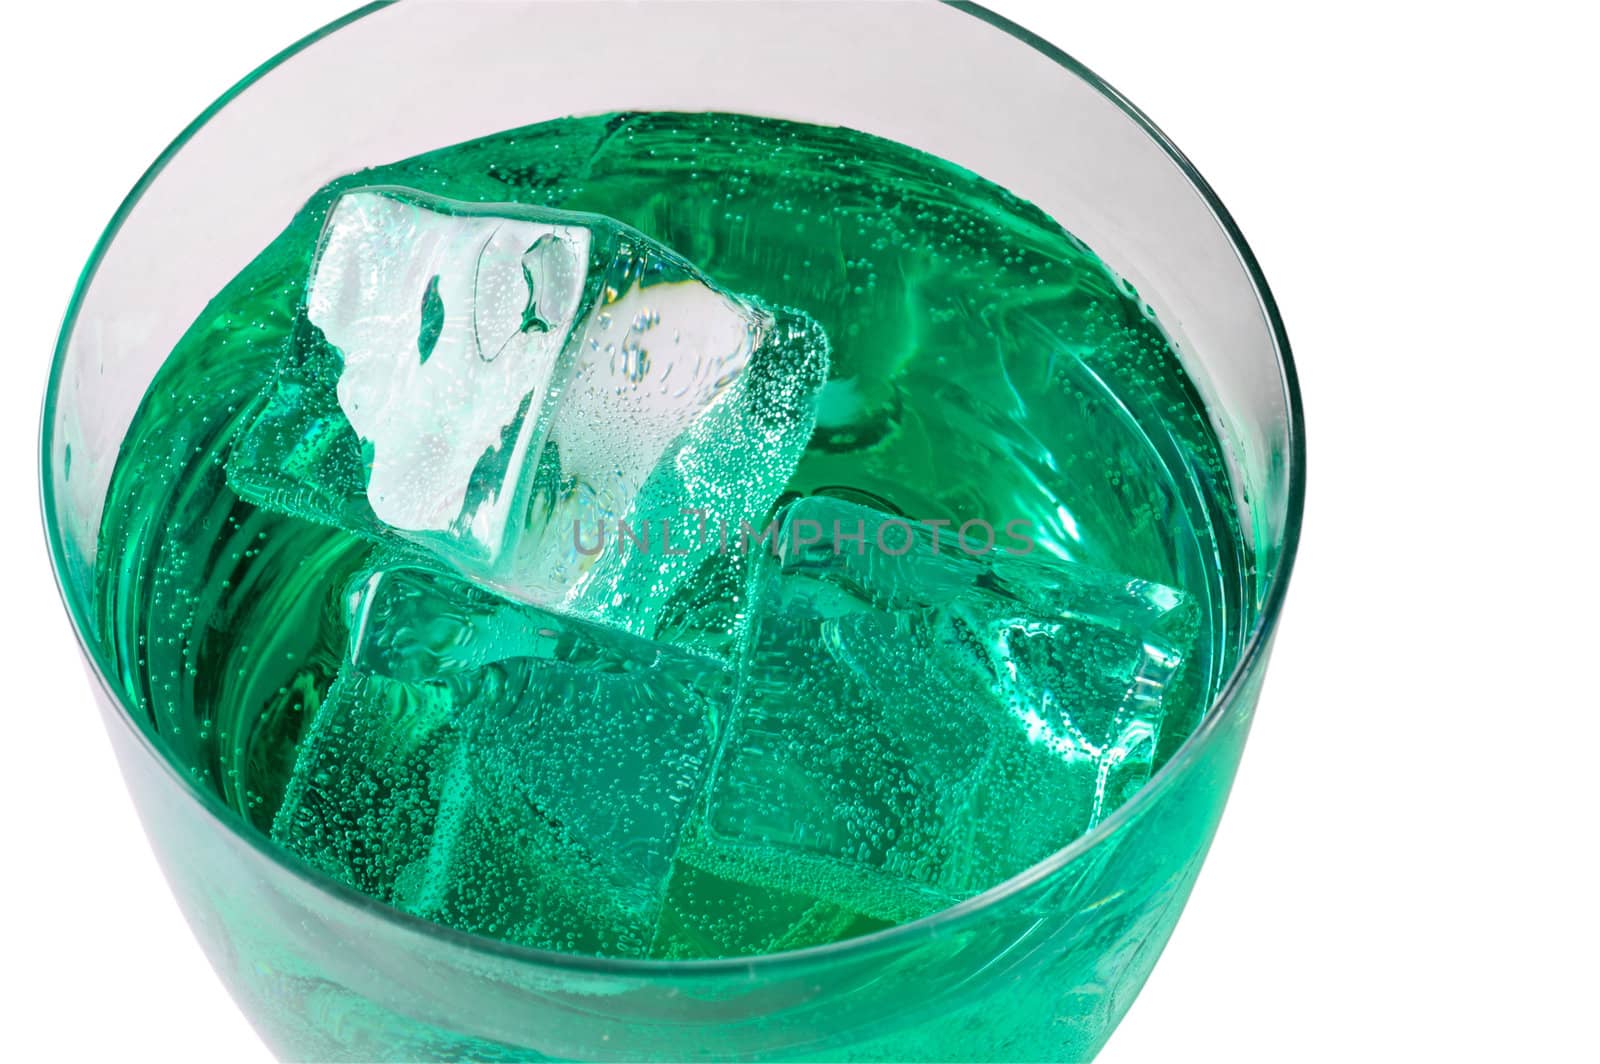 Mint  drink with ice cubes  (3) with clipping path